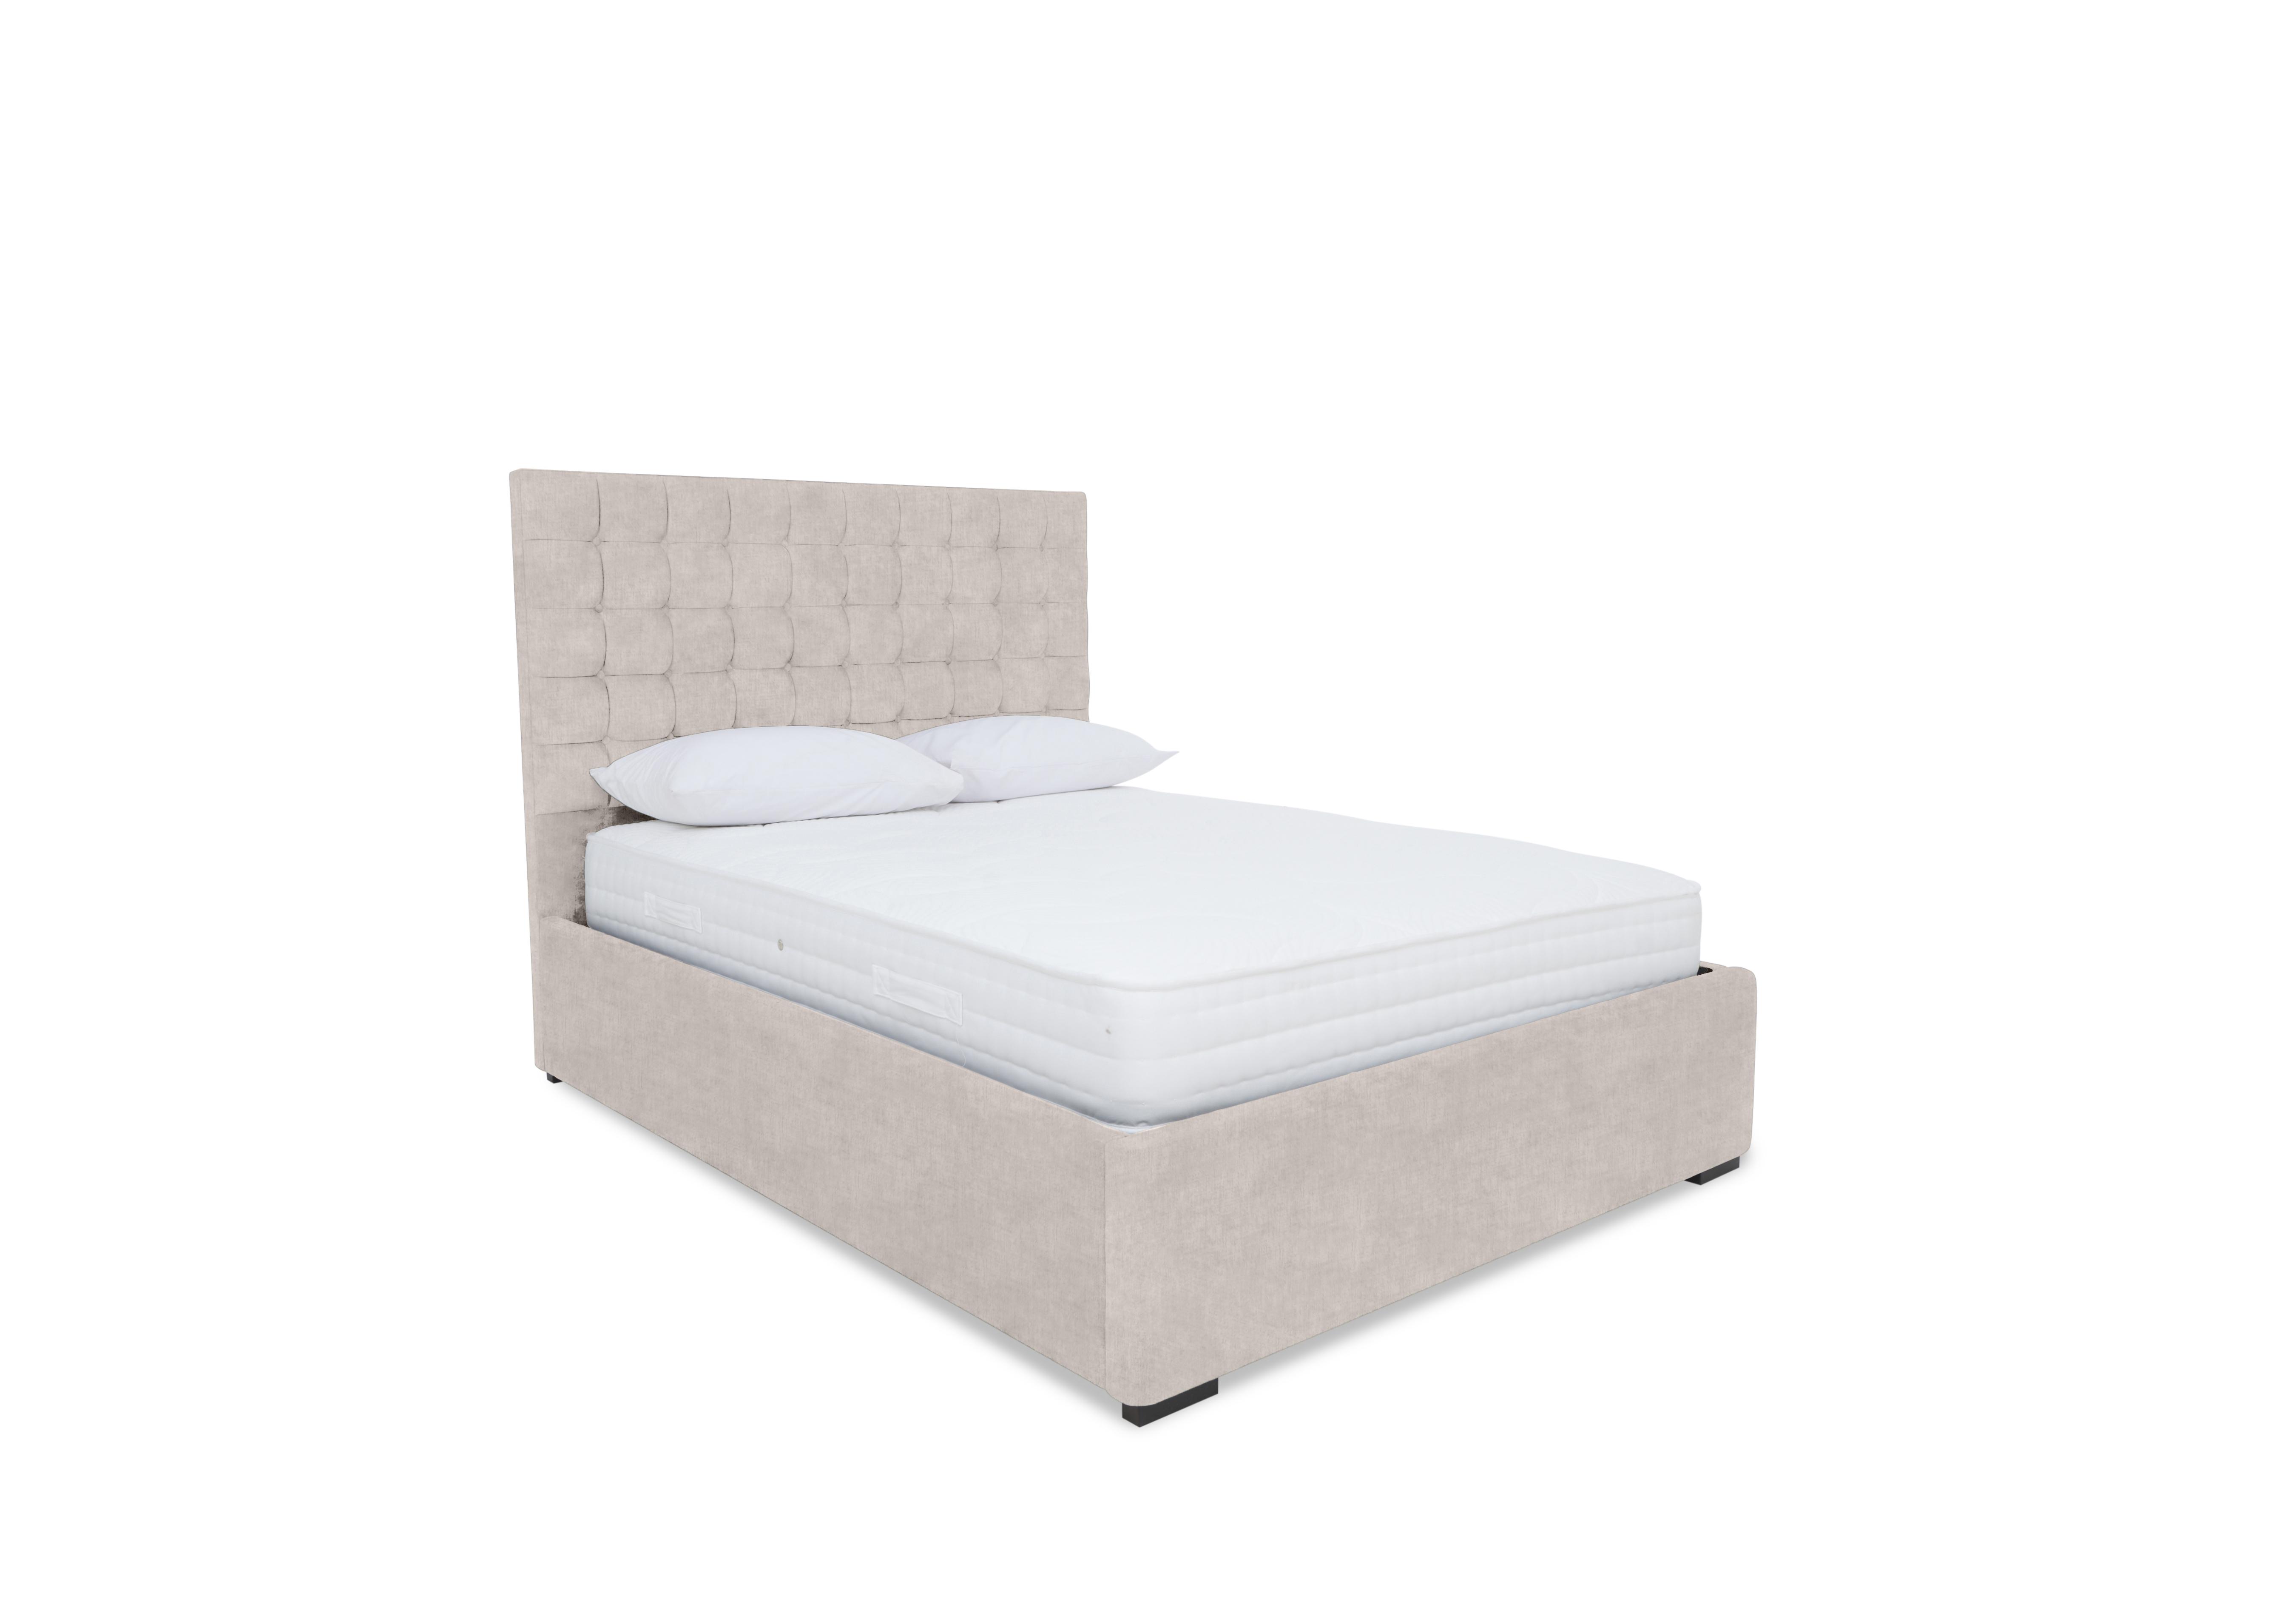 Dice Electric Ottoman Bed Frame in Lace Ivory on Furniture Village